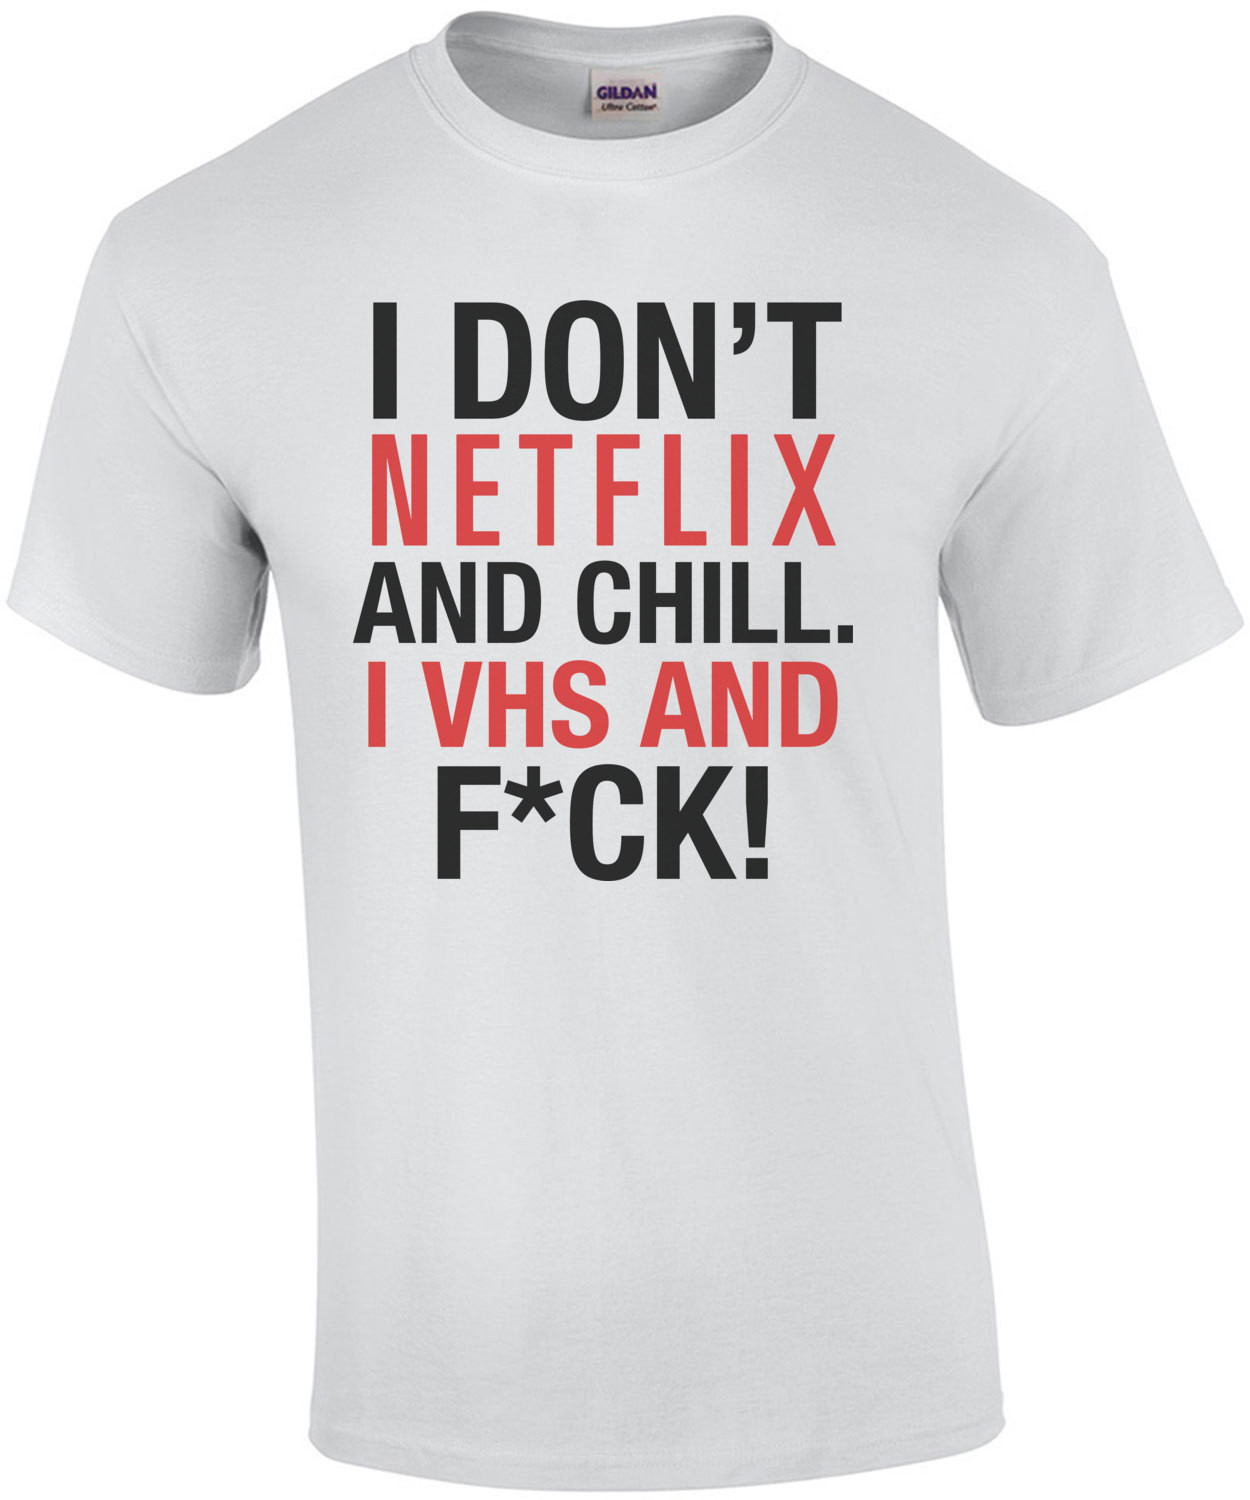 I Don't Netflix and Chill I VHS and Fuck T-Shirt